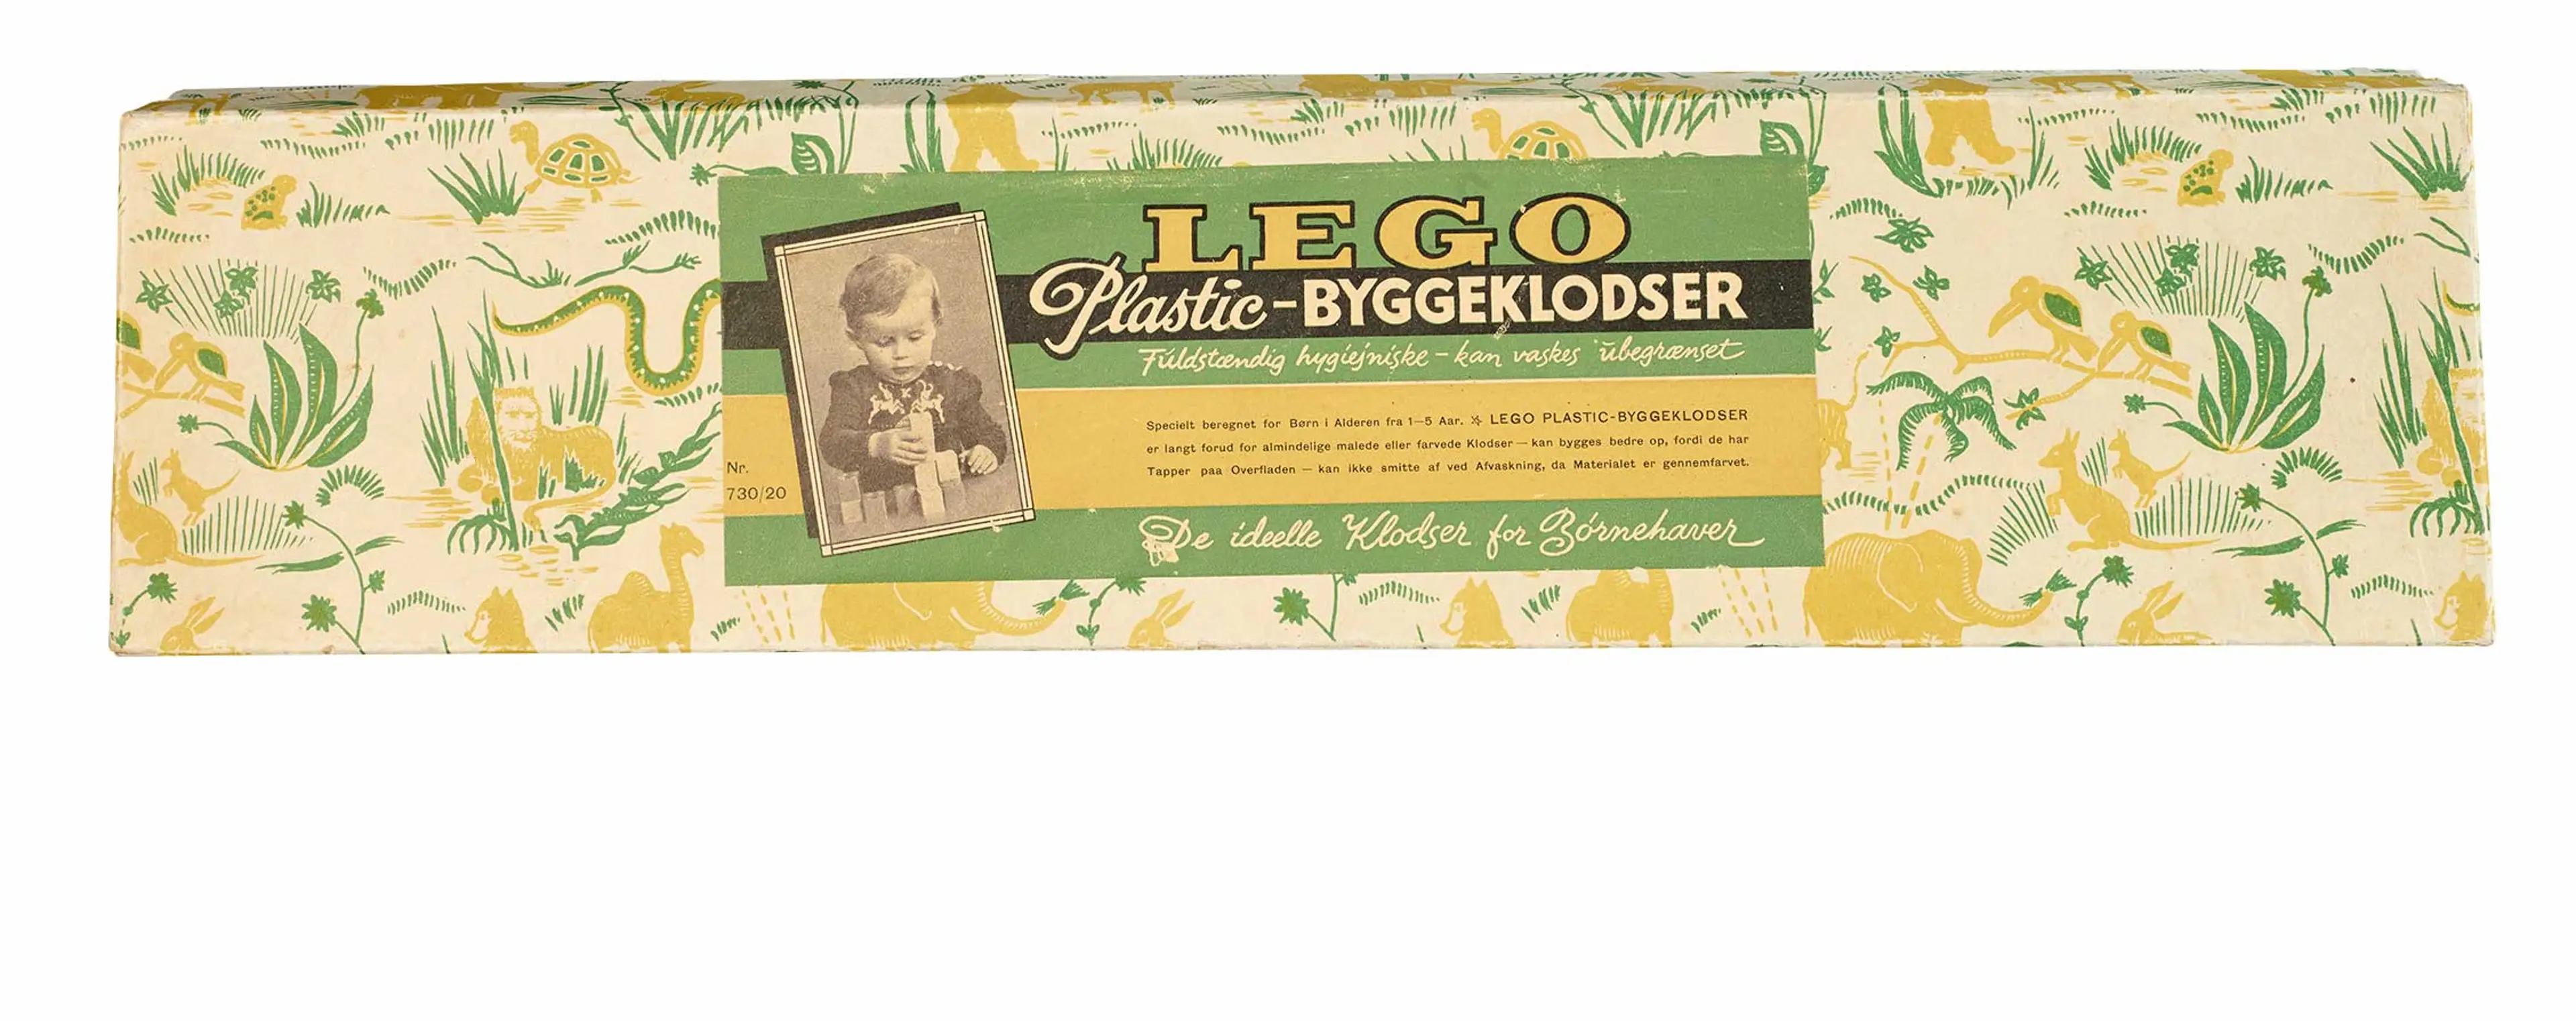 A box of LEGO plastic building bricks from 1949